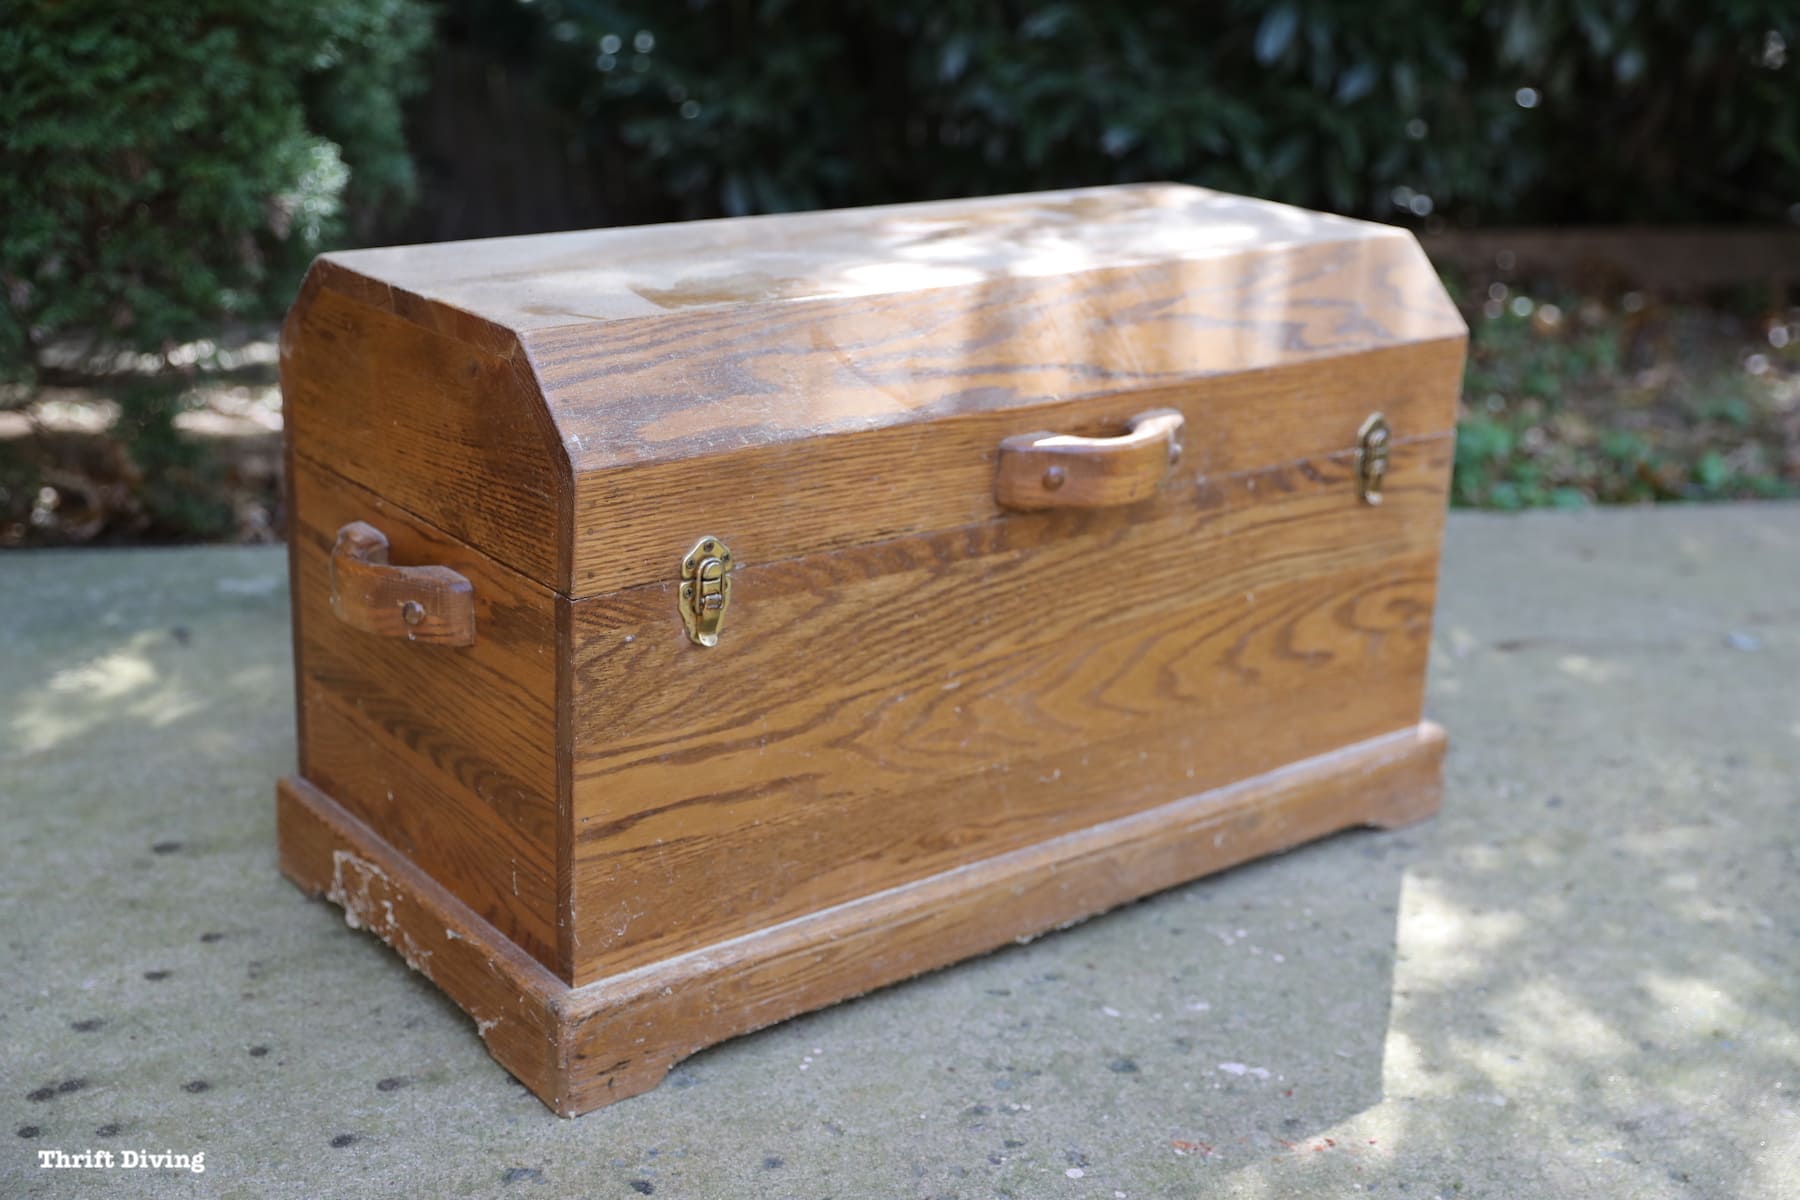 Using liming wax on an oak wood chest - BEFORE - Thrift Diving